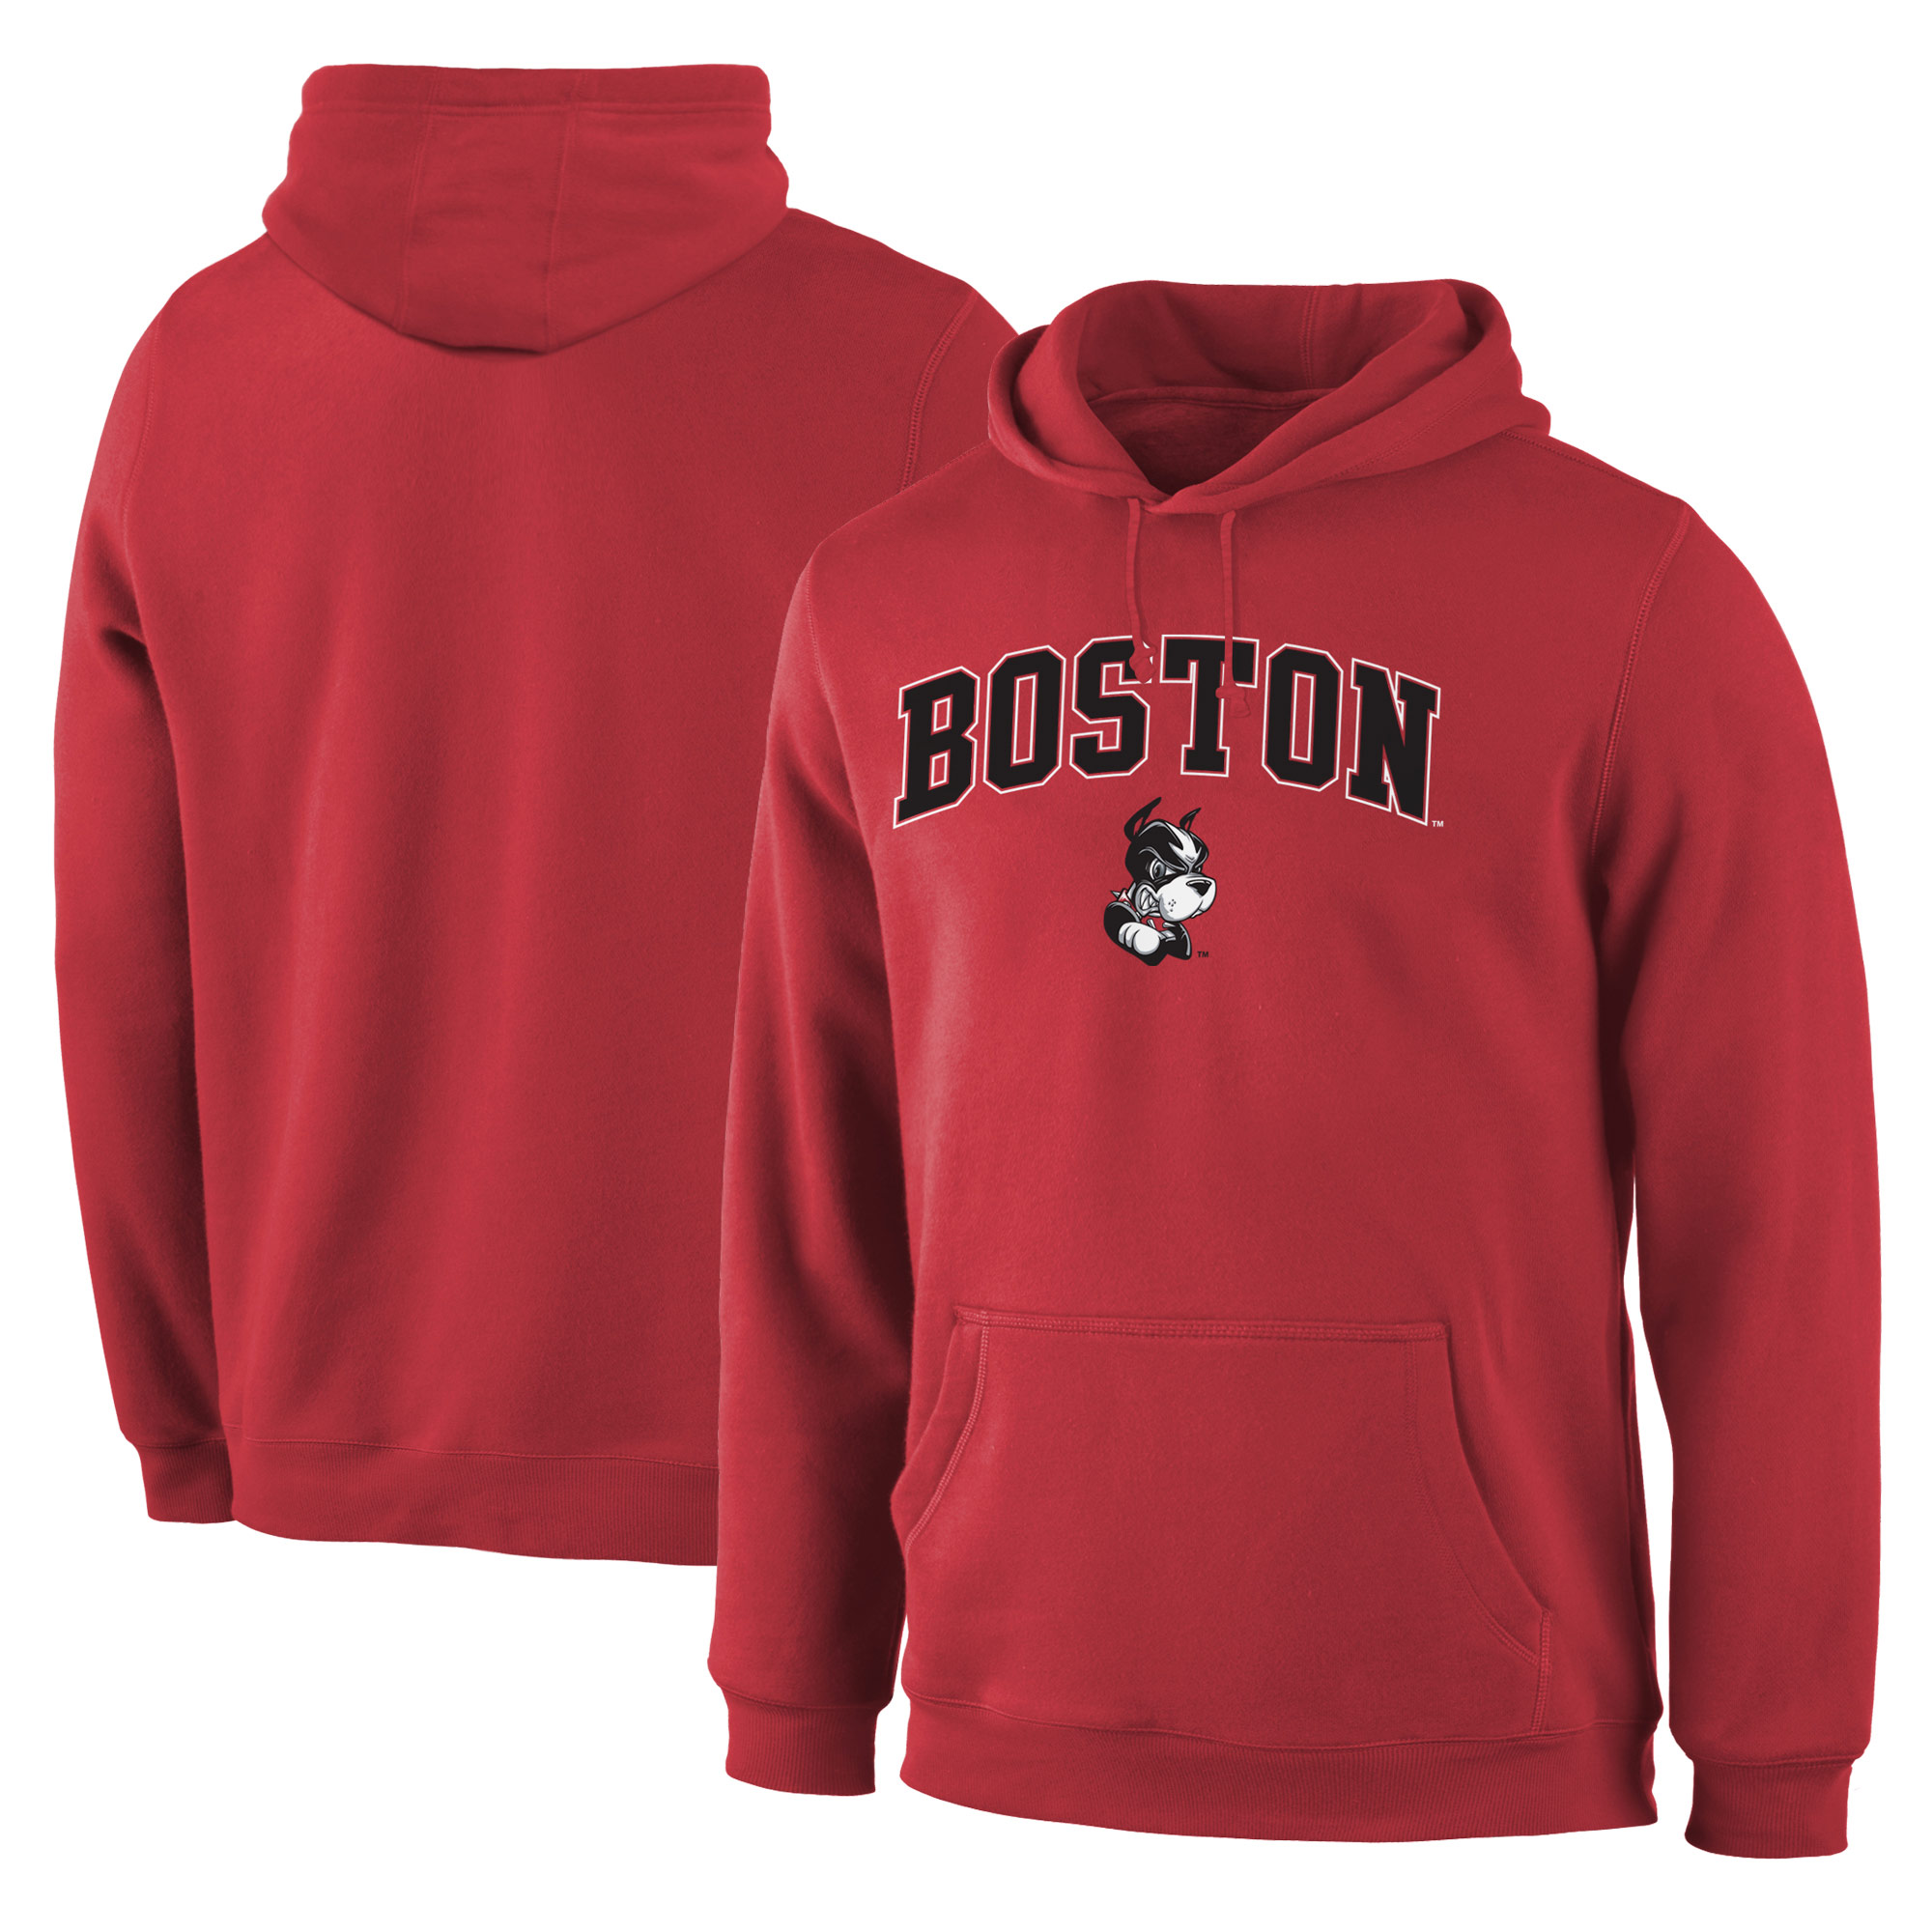 Boston University Red Campus Pullover Hoodie